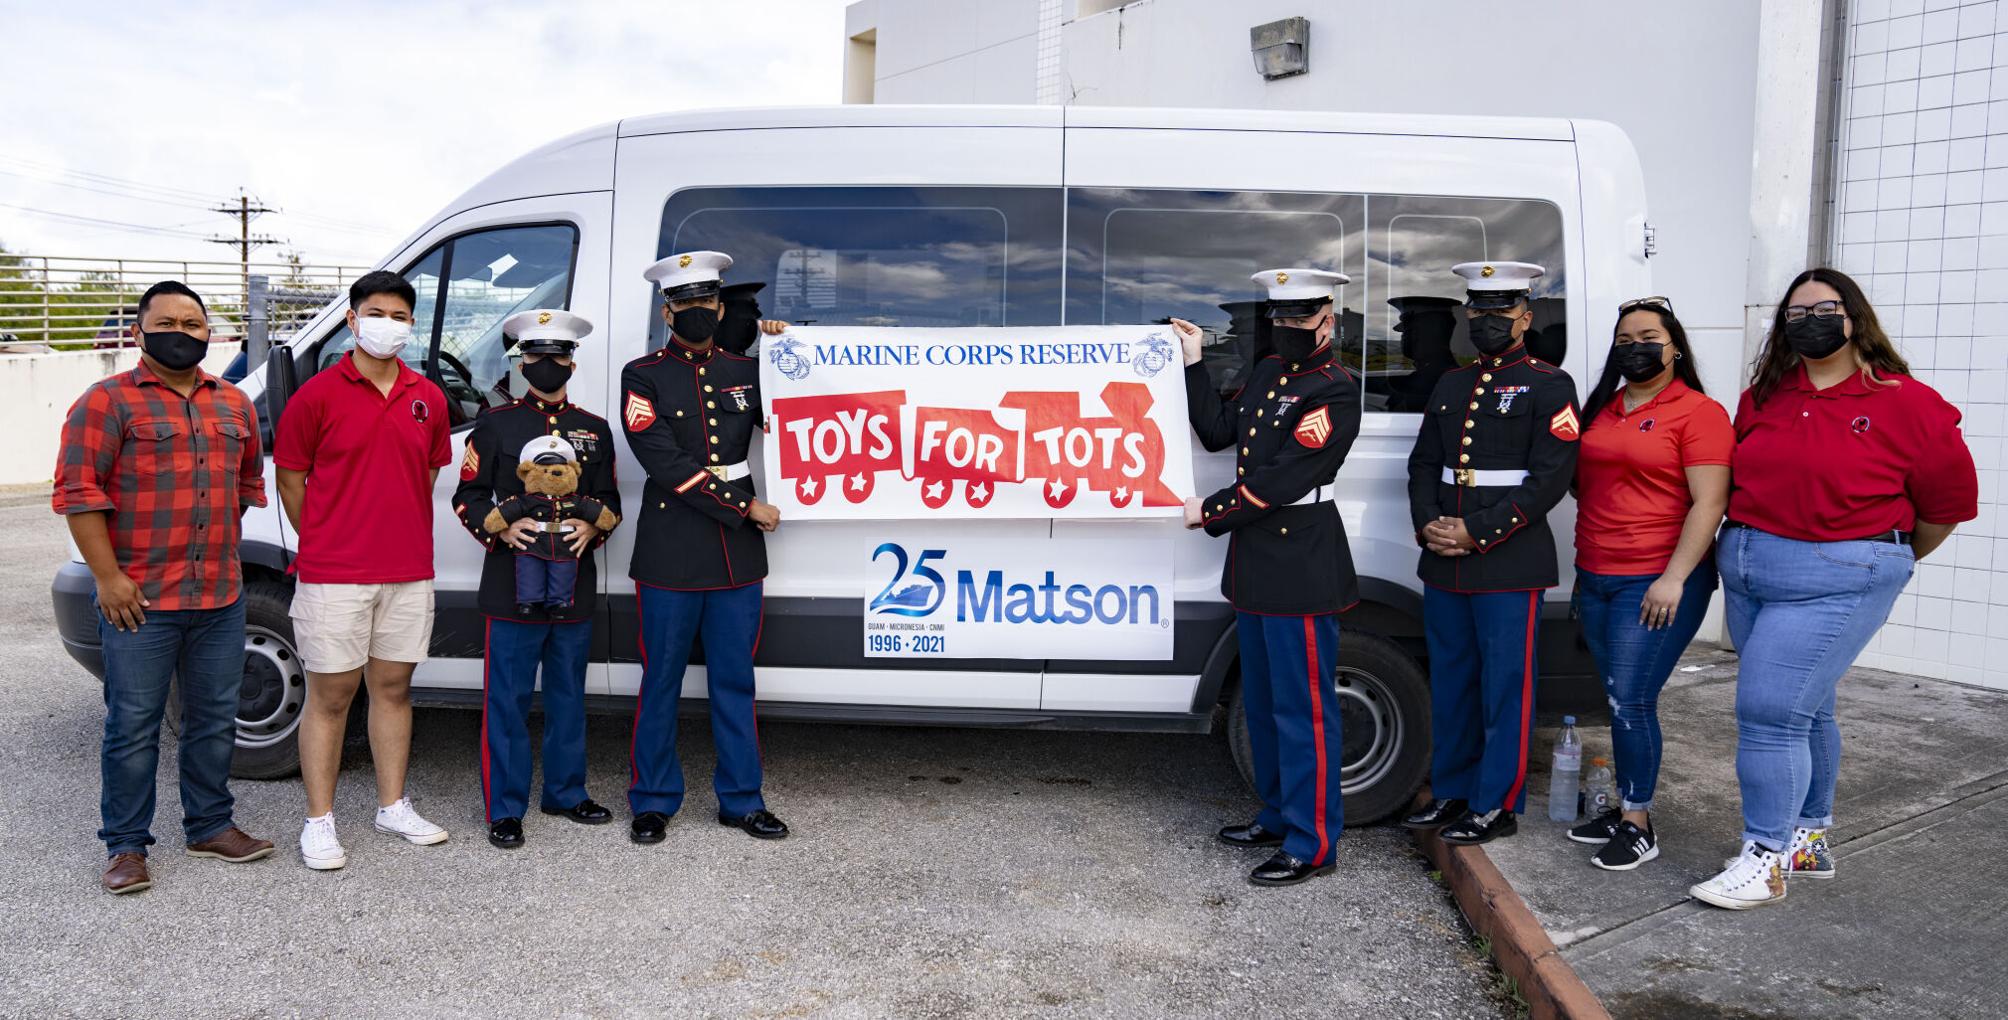 The U.S. Marine Corps Reserve, the Saipan Chamber of Commerce and the Associated Students of the Northern Marianas College distributed more than 1,200 toys in the CNMI this holiday season as part of the “Toys for Tots” program  hosted by the USMC Reserve. The program provides toys to disadvantaged children during the Christmas holiday season. In photo from left are chamber executive director Lee Tenorio, ASNMC vice president Gerald Crisostomo Jr., Sgt. Damian Vieira, Sgt. Nicohlas Benjamin Ooka, Sgt. Stephen Smith, Cpl. Donald John Pangelinan, Northern Marianas College Office of Student Activities and Leadership program coordinator Maia Pangelinan, and ASNMC president Alyssa Attao. 